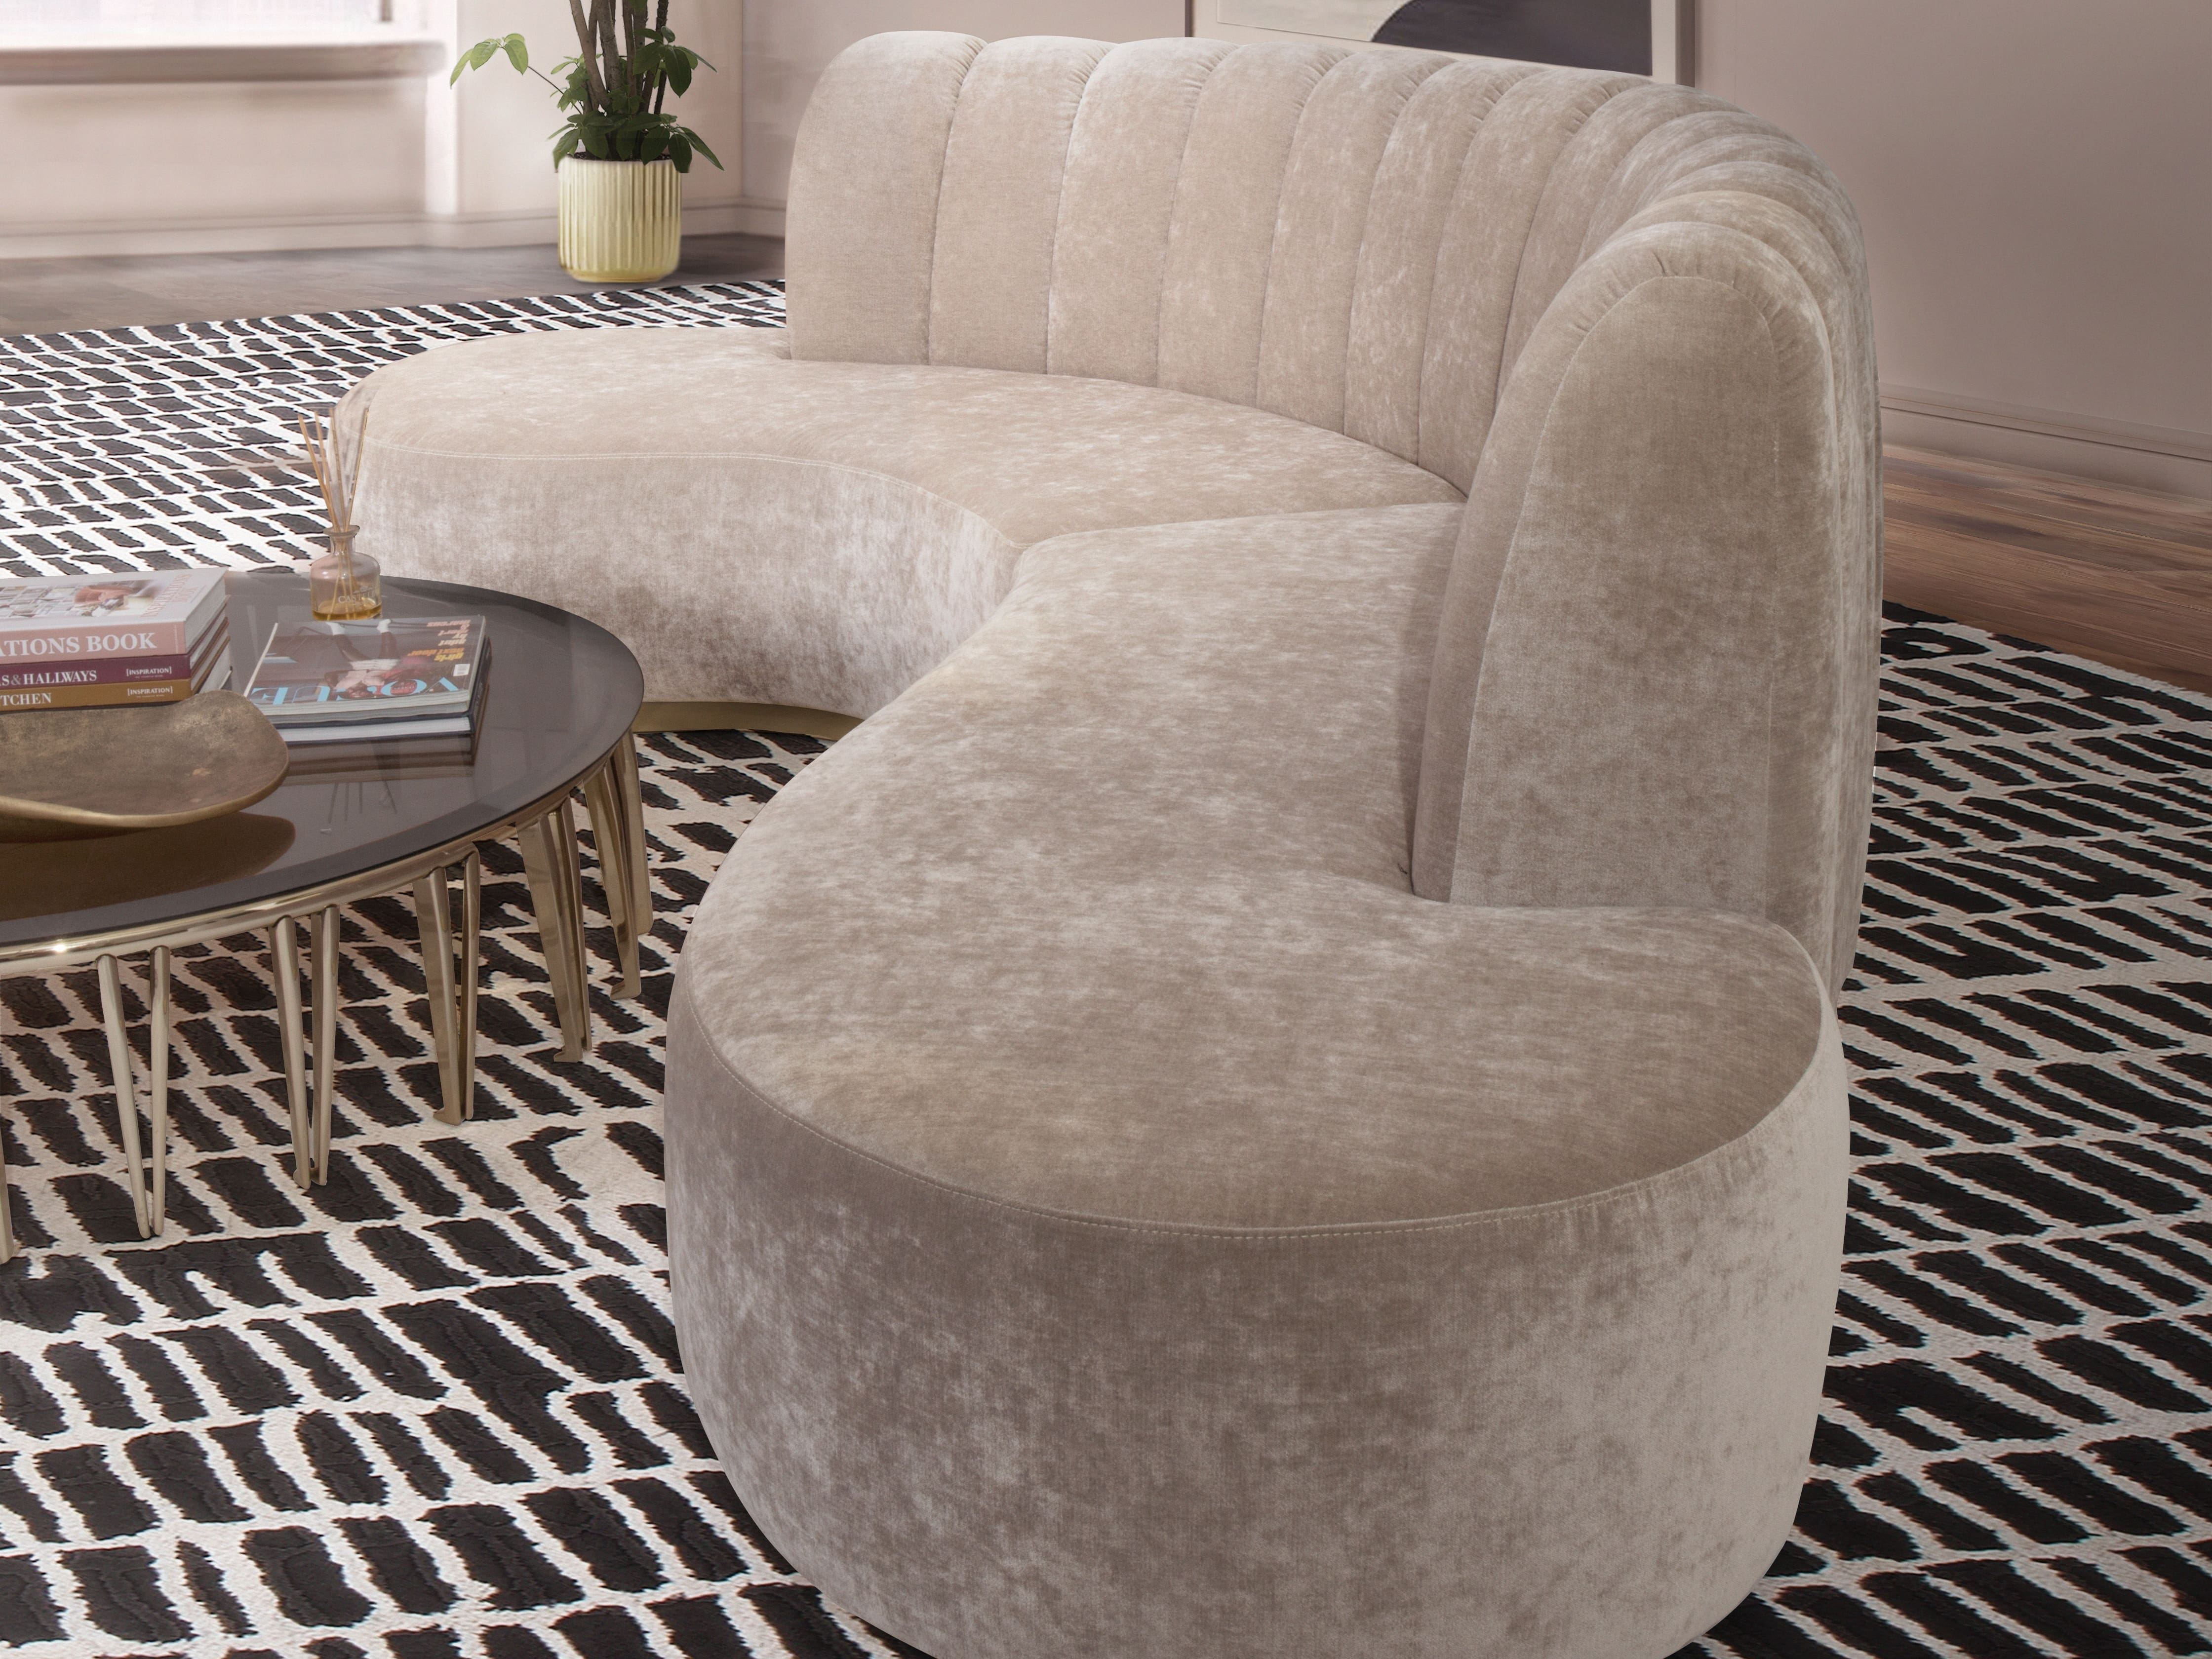 Rug'Society Neutral COLL Living Room by Rug'Society